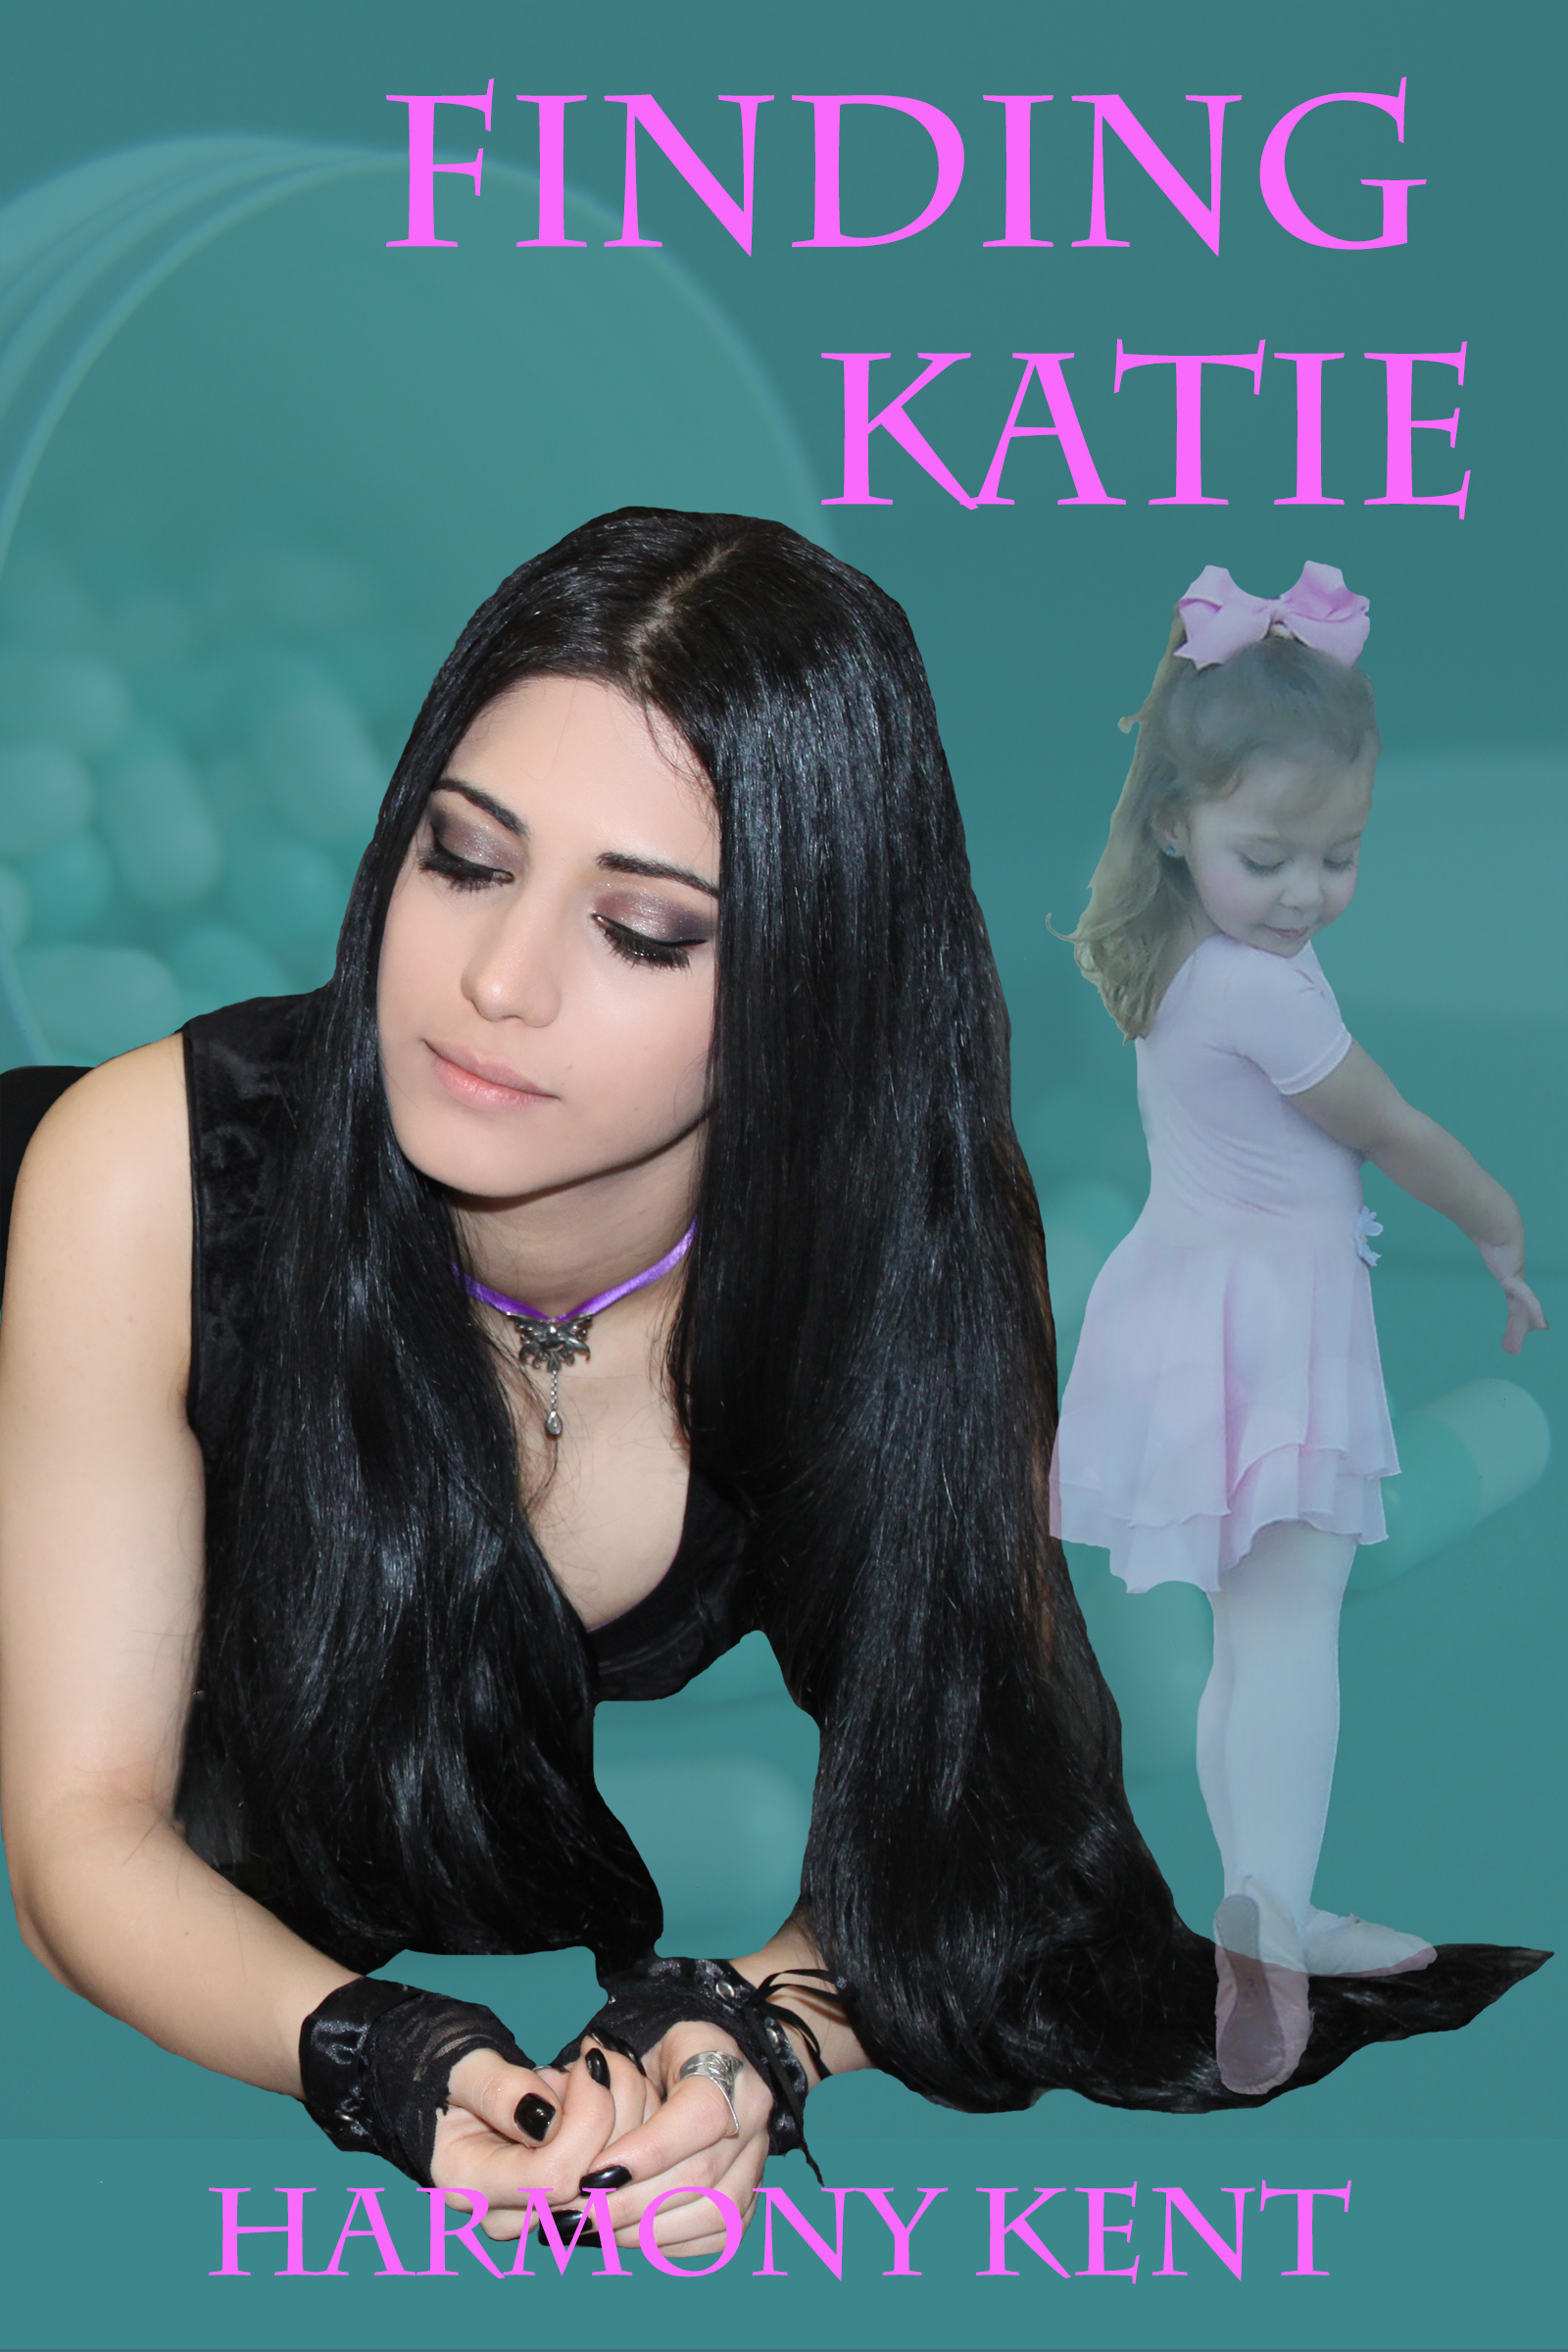 Kindle Cover Finding Katie1